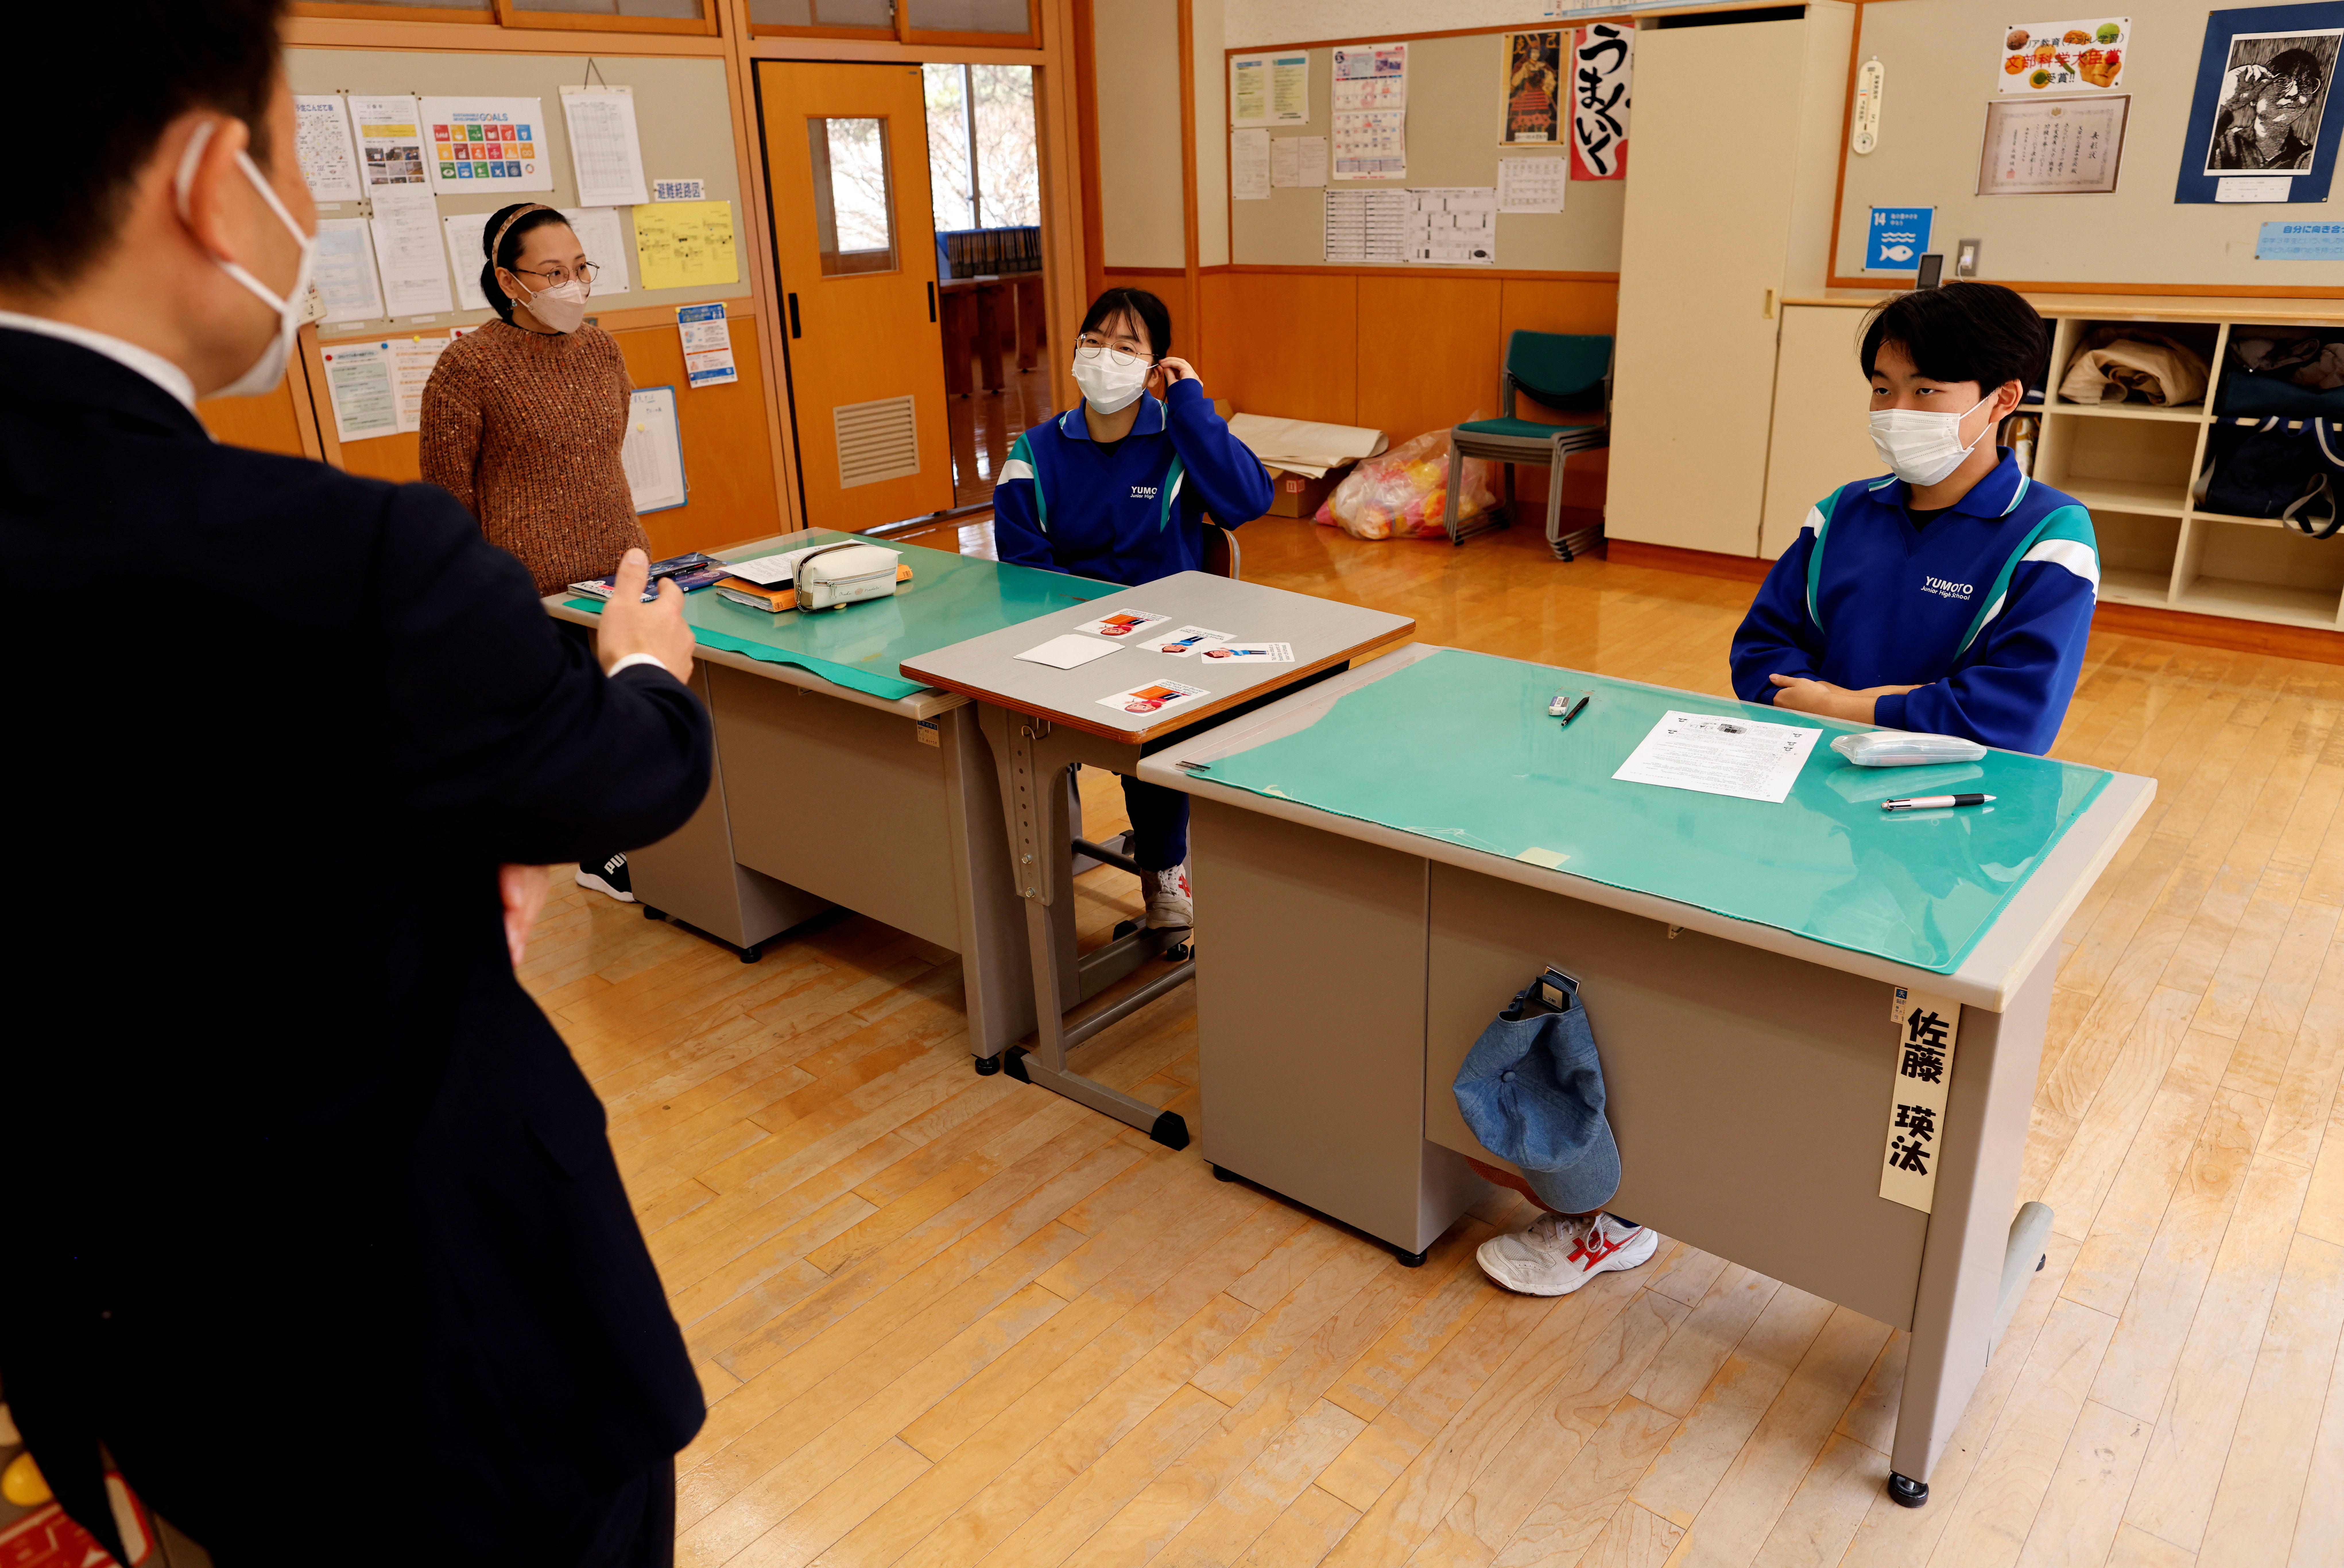 Eita and Aoi take part in their last English class on the day before their graduation